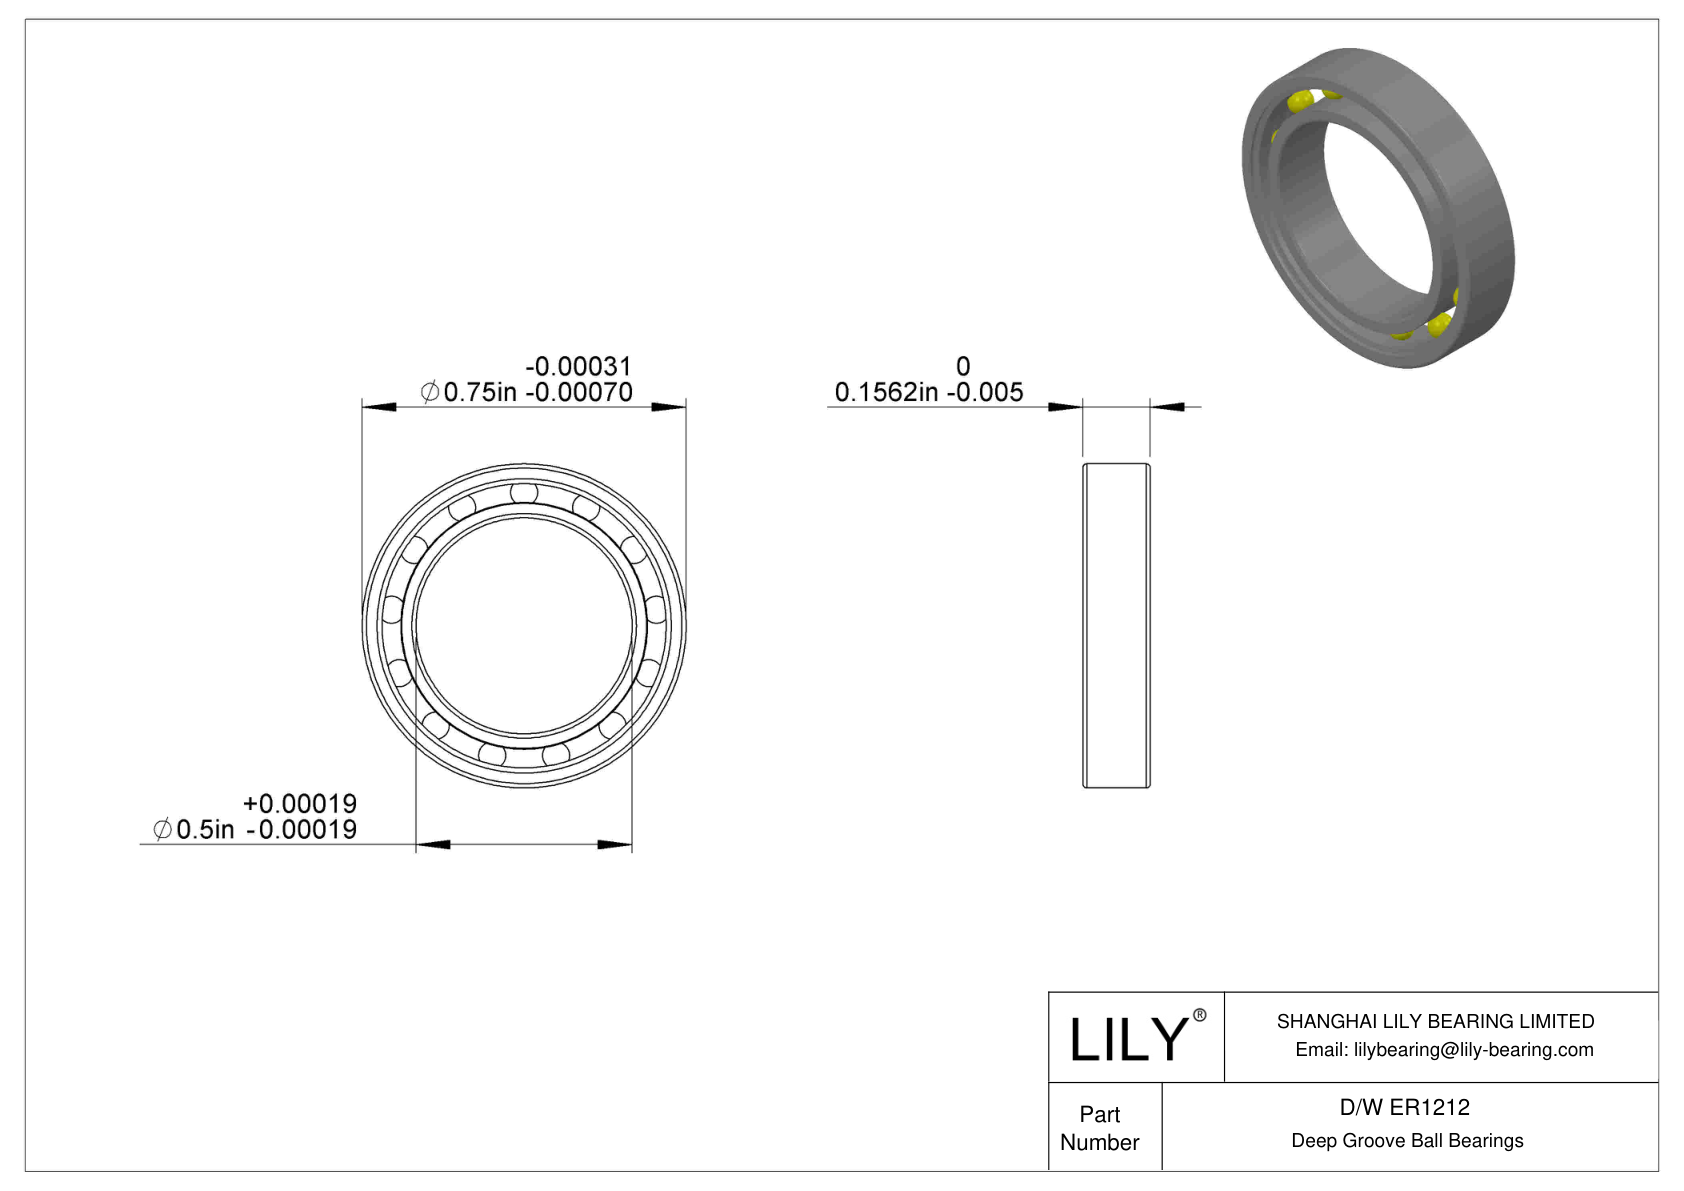 D/W ER1212 Stainless Steel Deep Groove Ball Bearings cad drawing